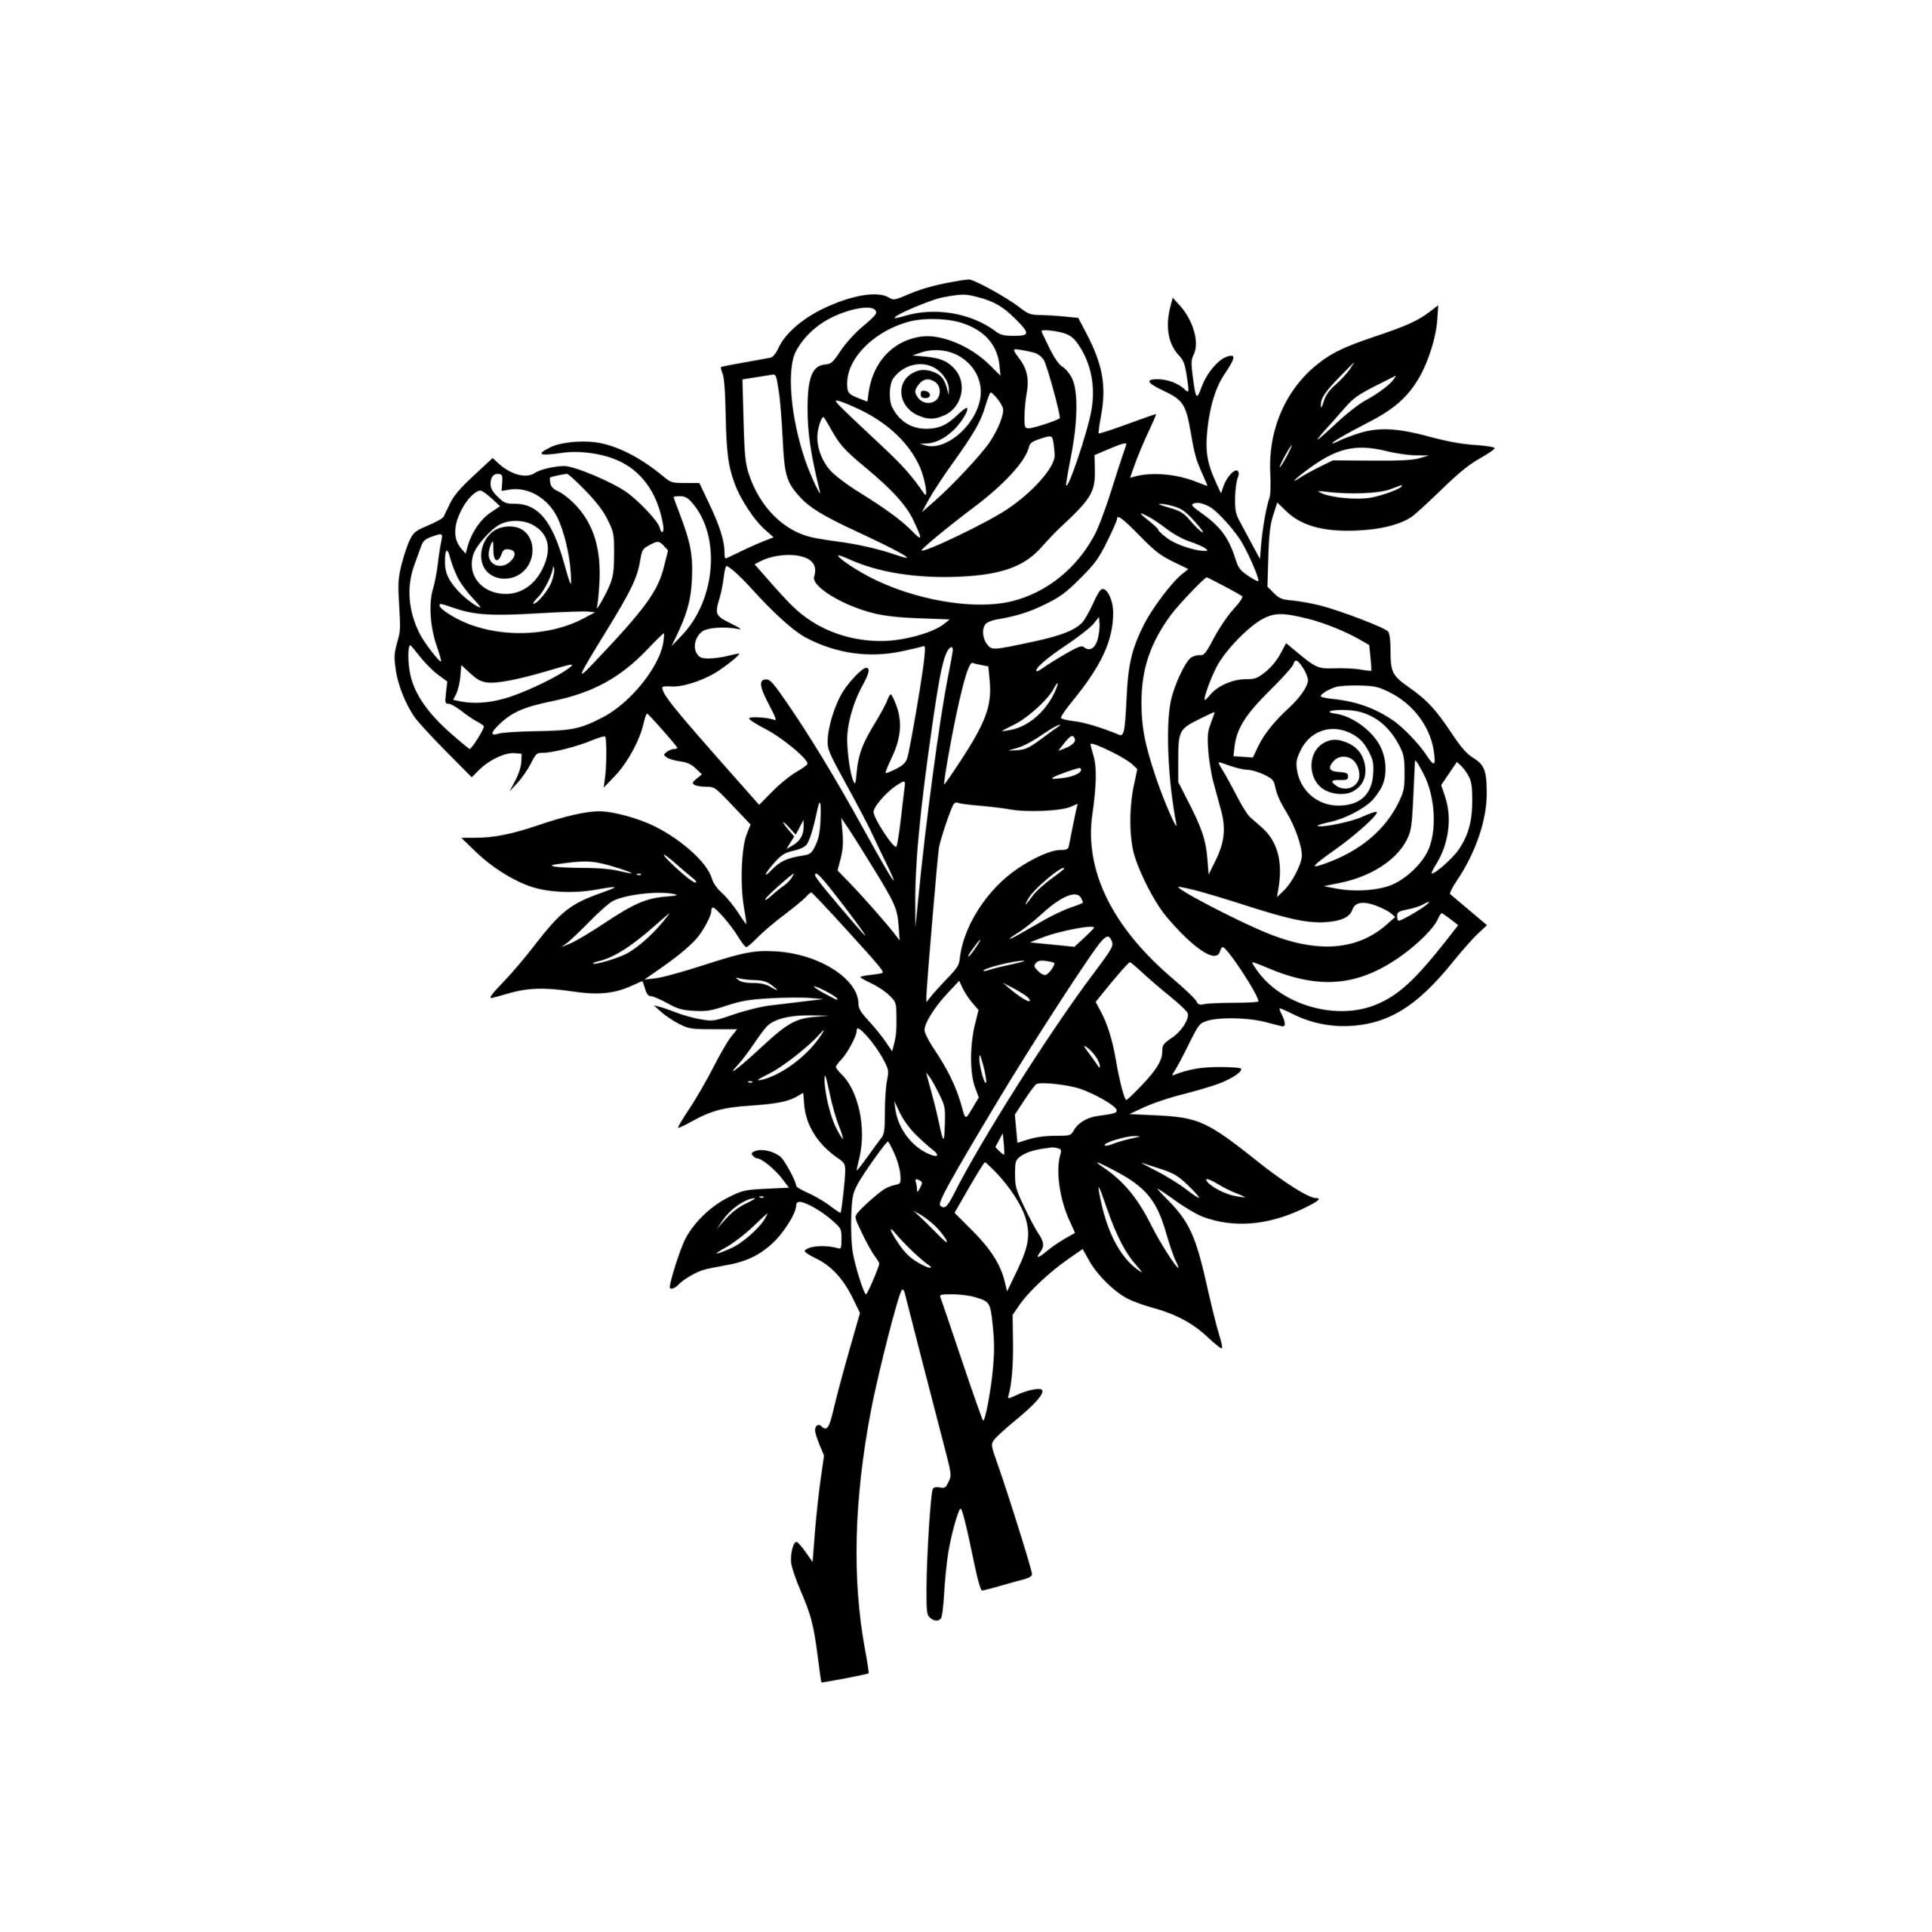 Rose Romance SVG/PNG/DXF Image for Cricut, Silhouette, Laser Machines